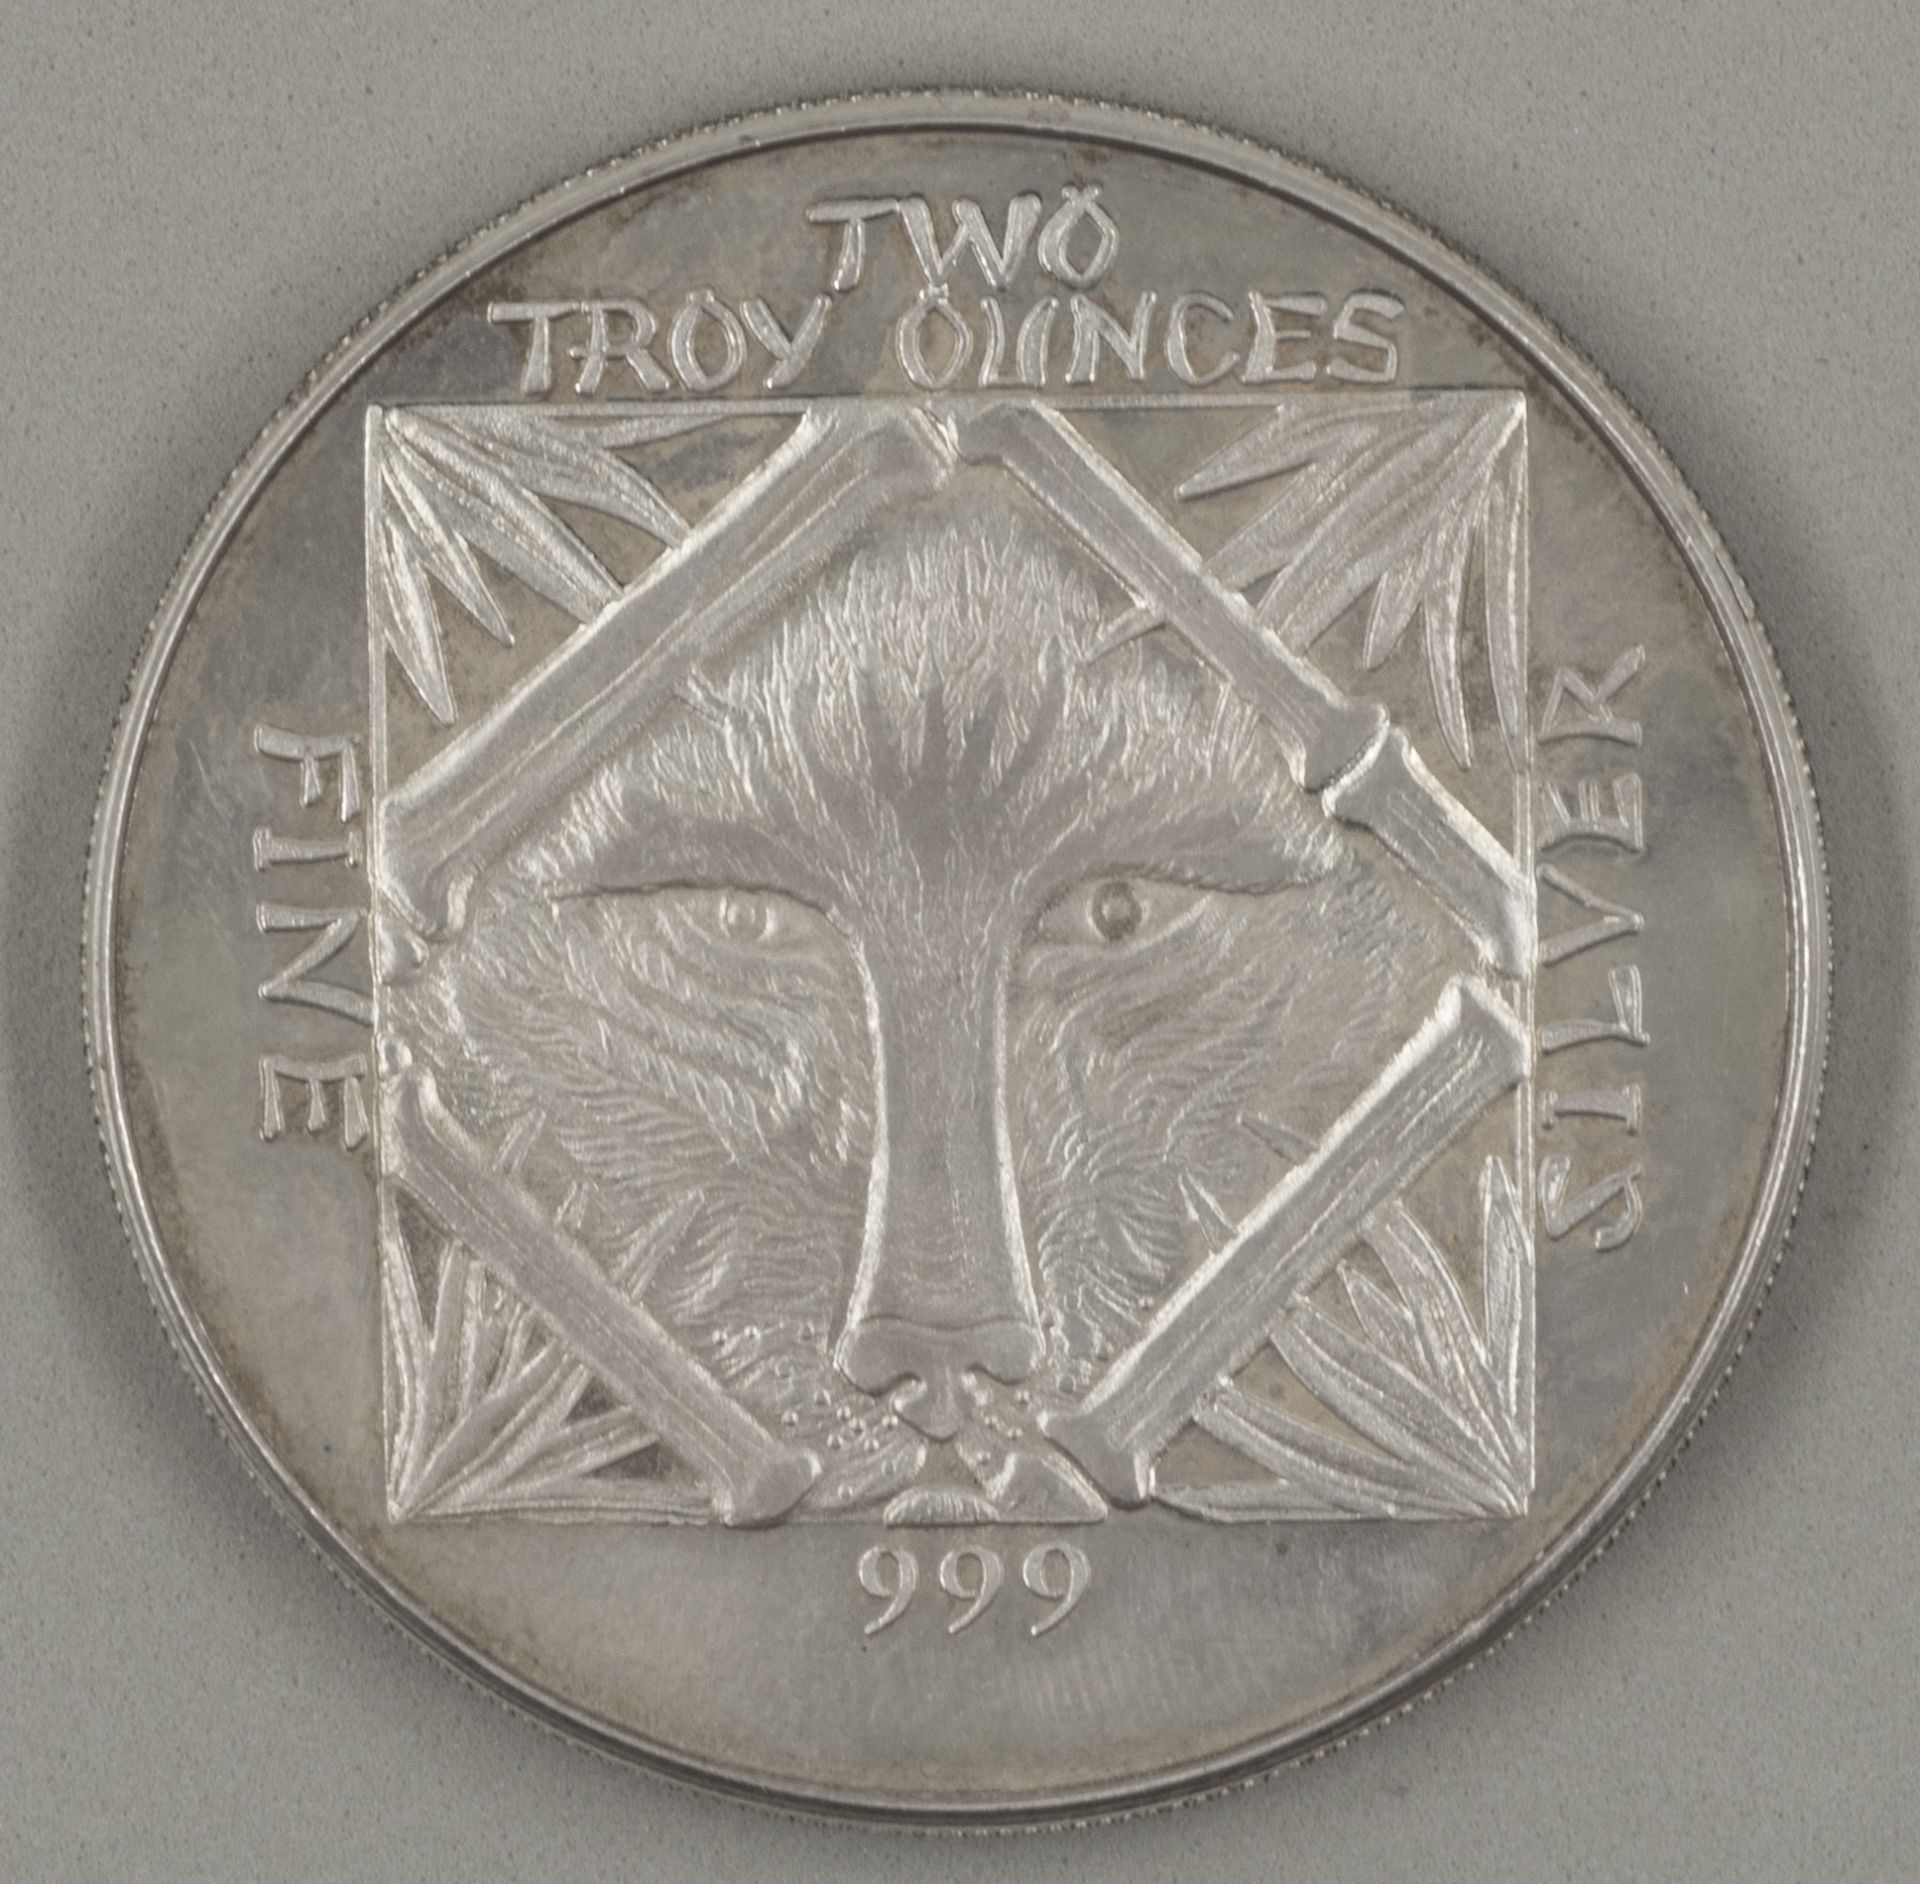 Chinese Panda Commcmorative, 2 Troy Ounce Round, 999 Fine Silver. - Image 2 of 2